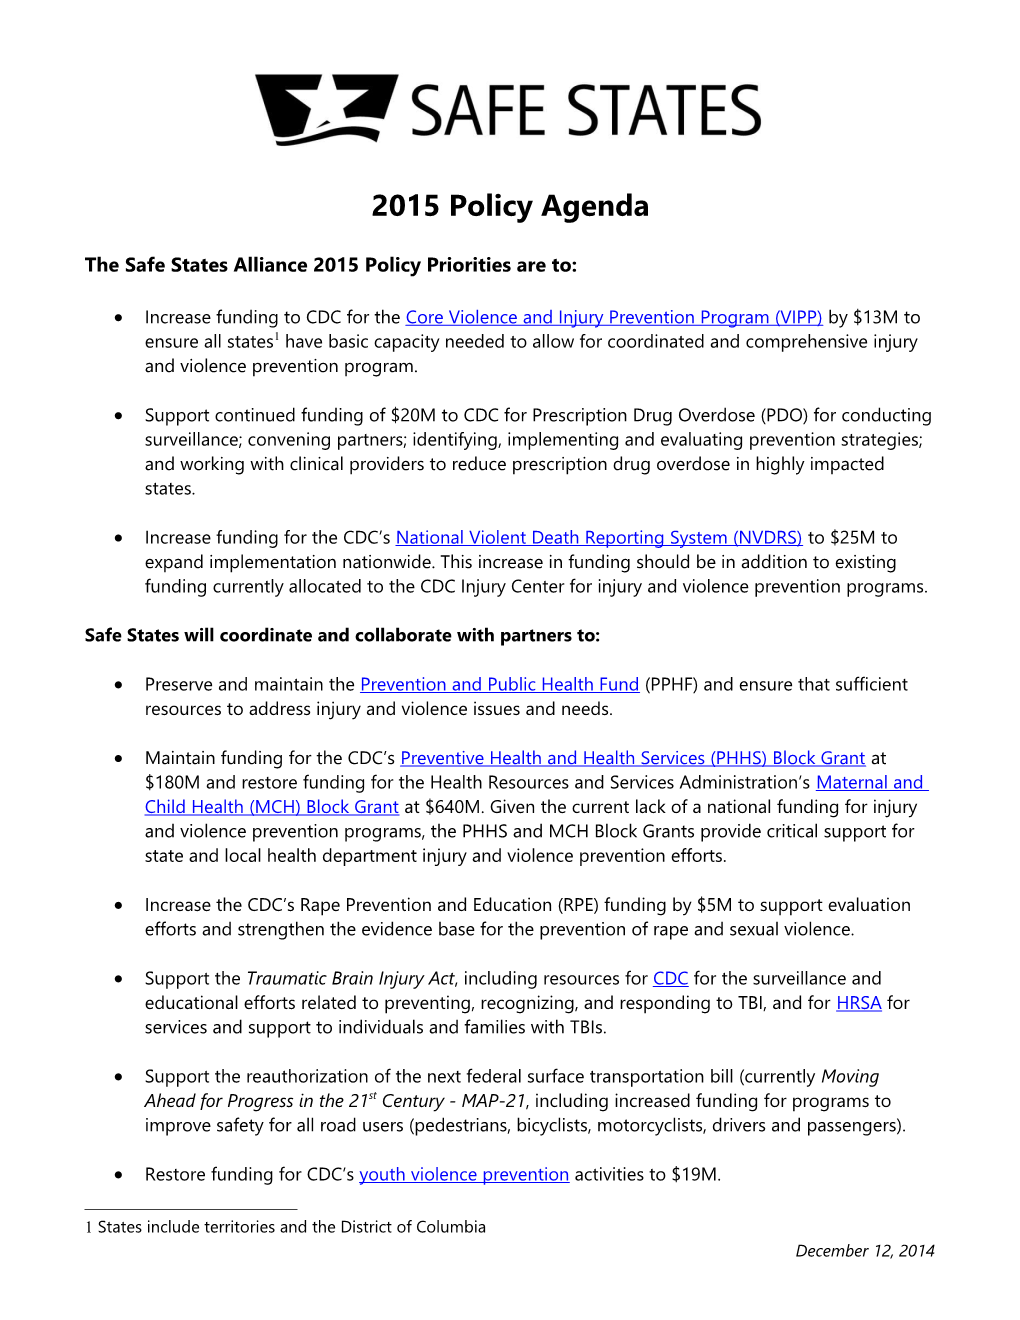 2010 Proposed Policy Agenda Items